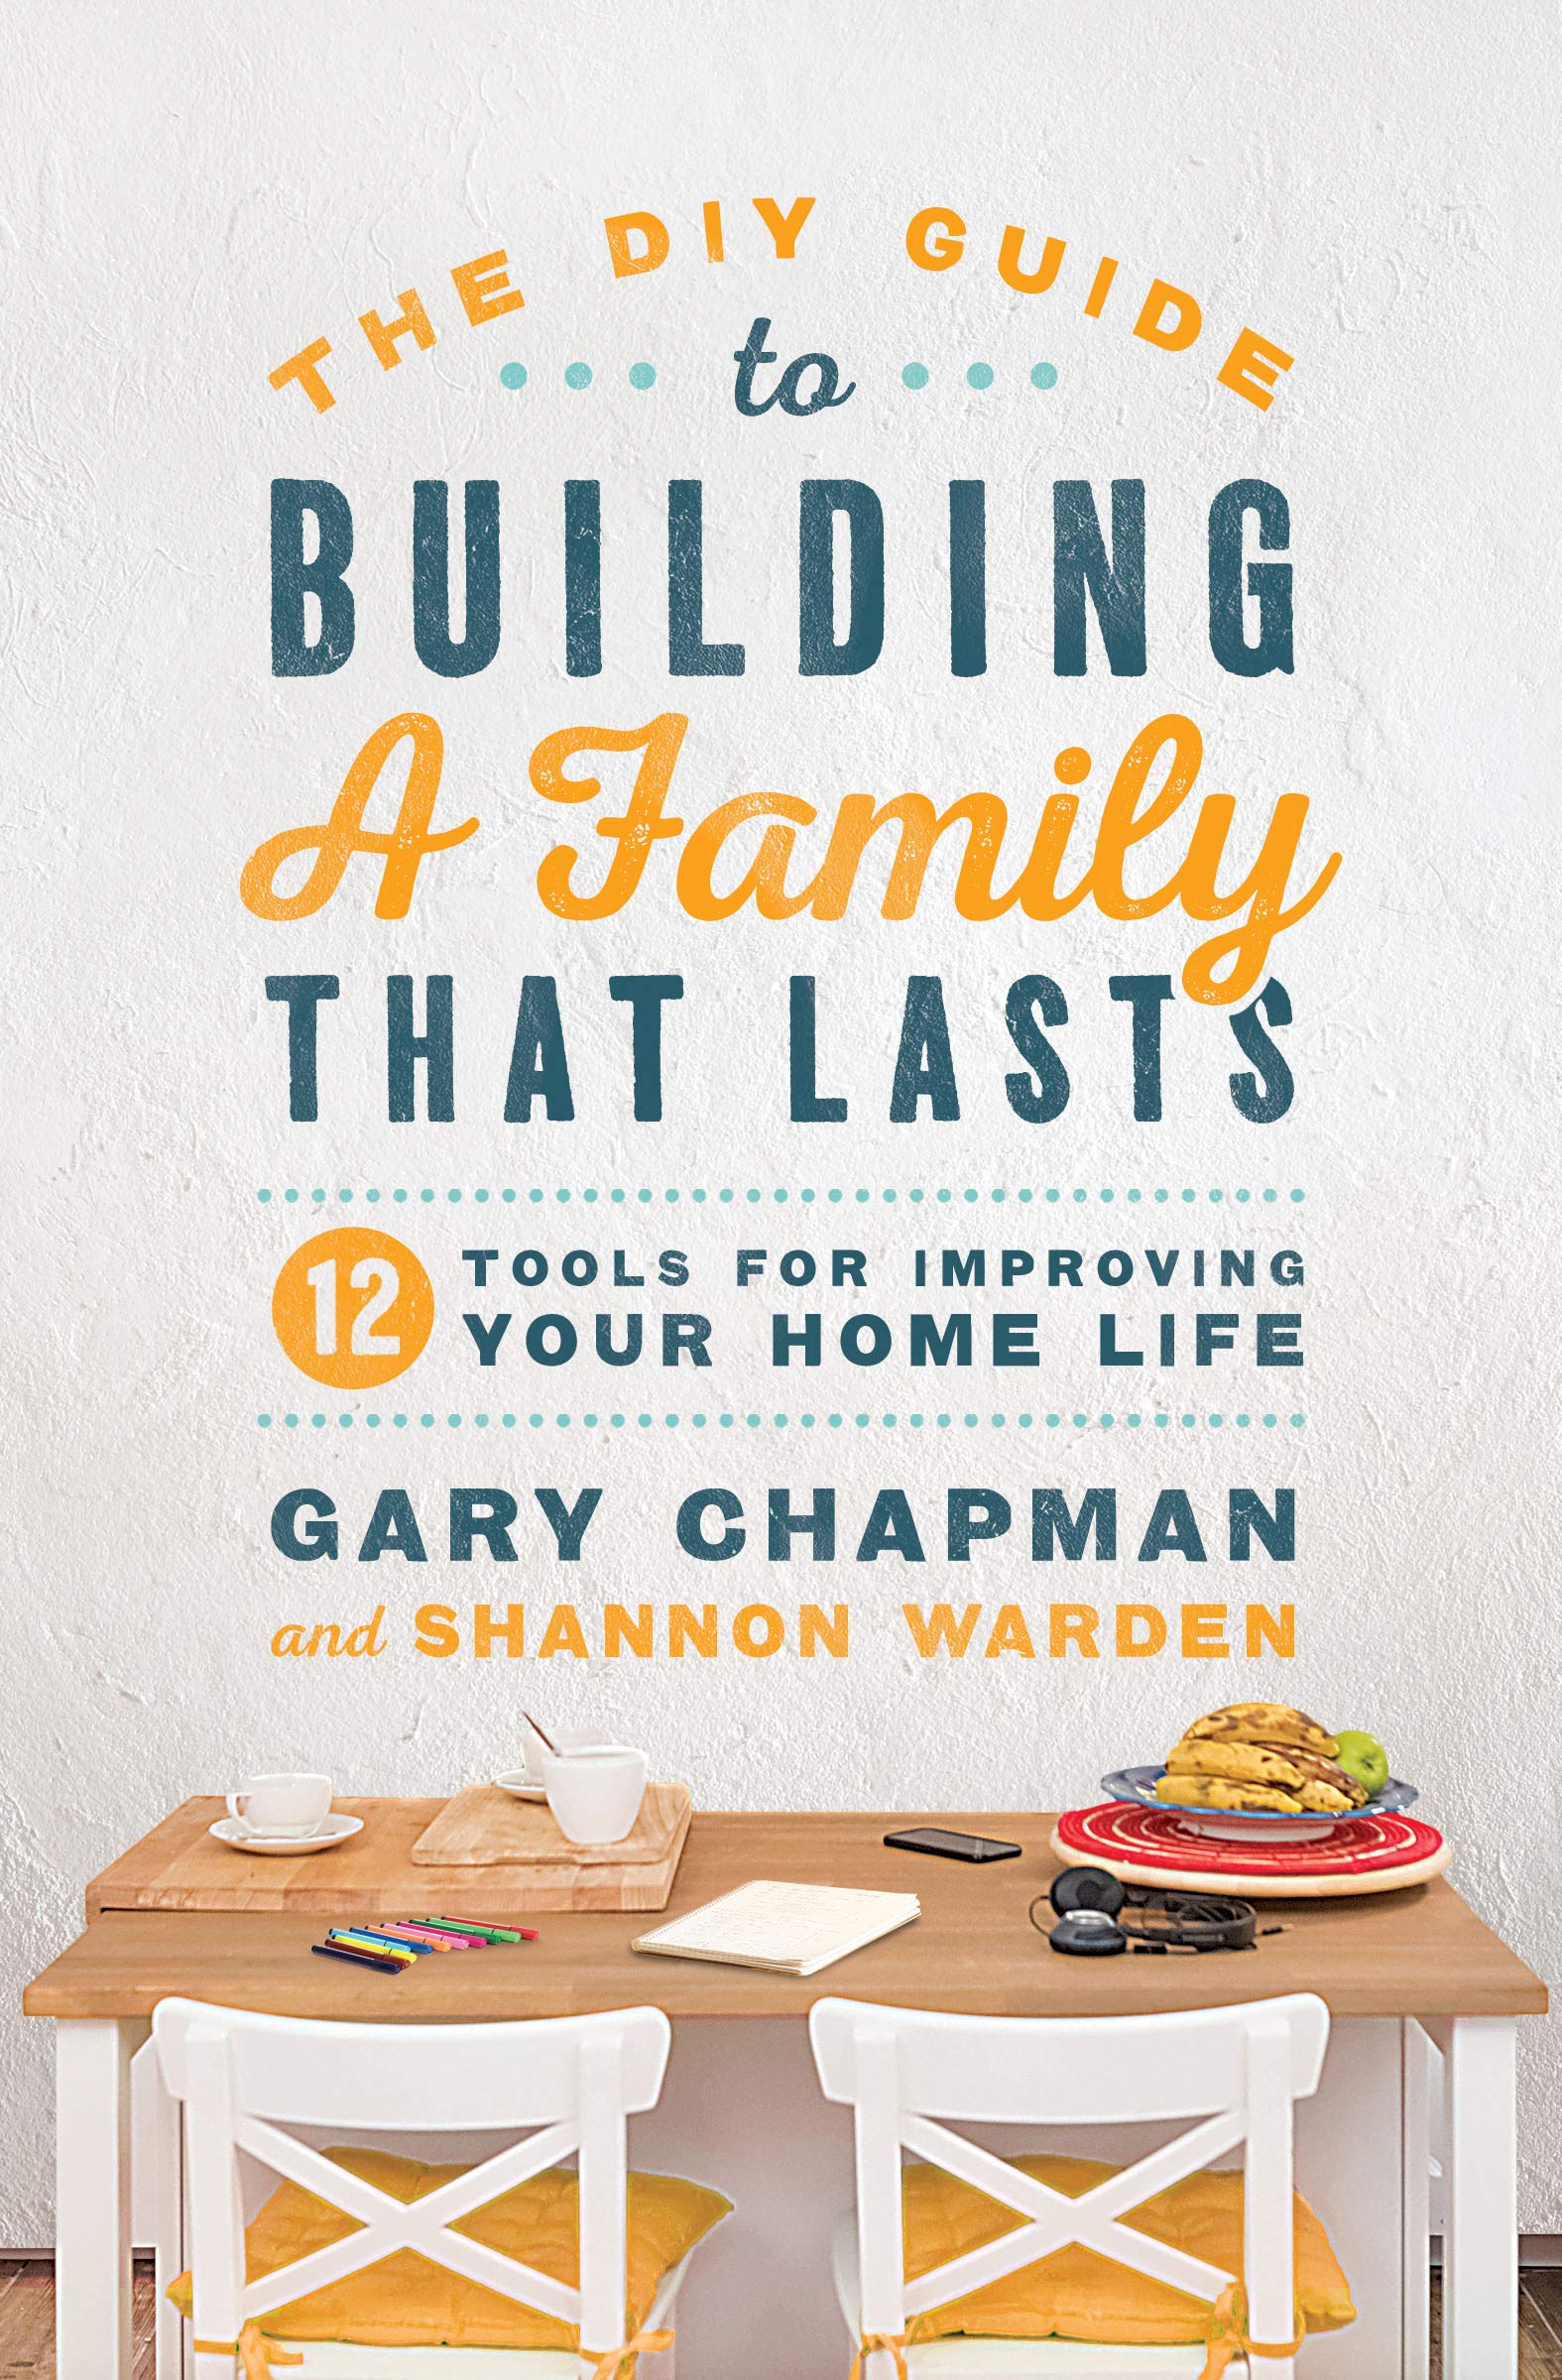 More information on DIY Guide To Building a FamilyThat Lasts